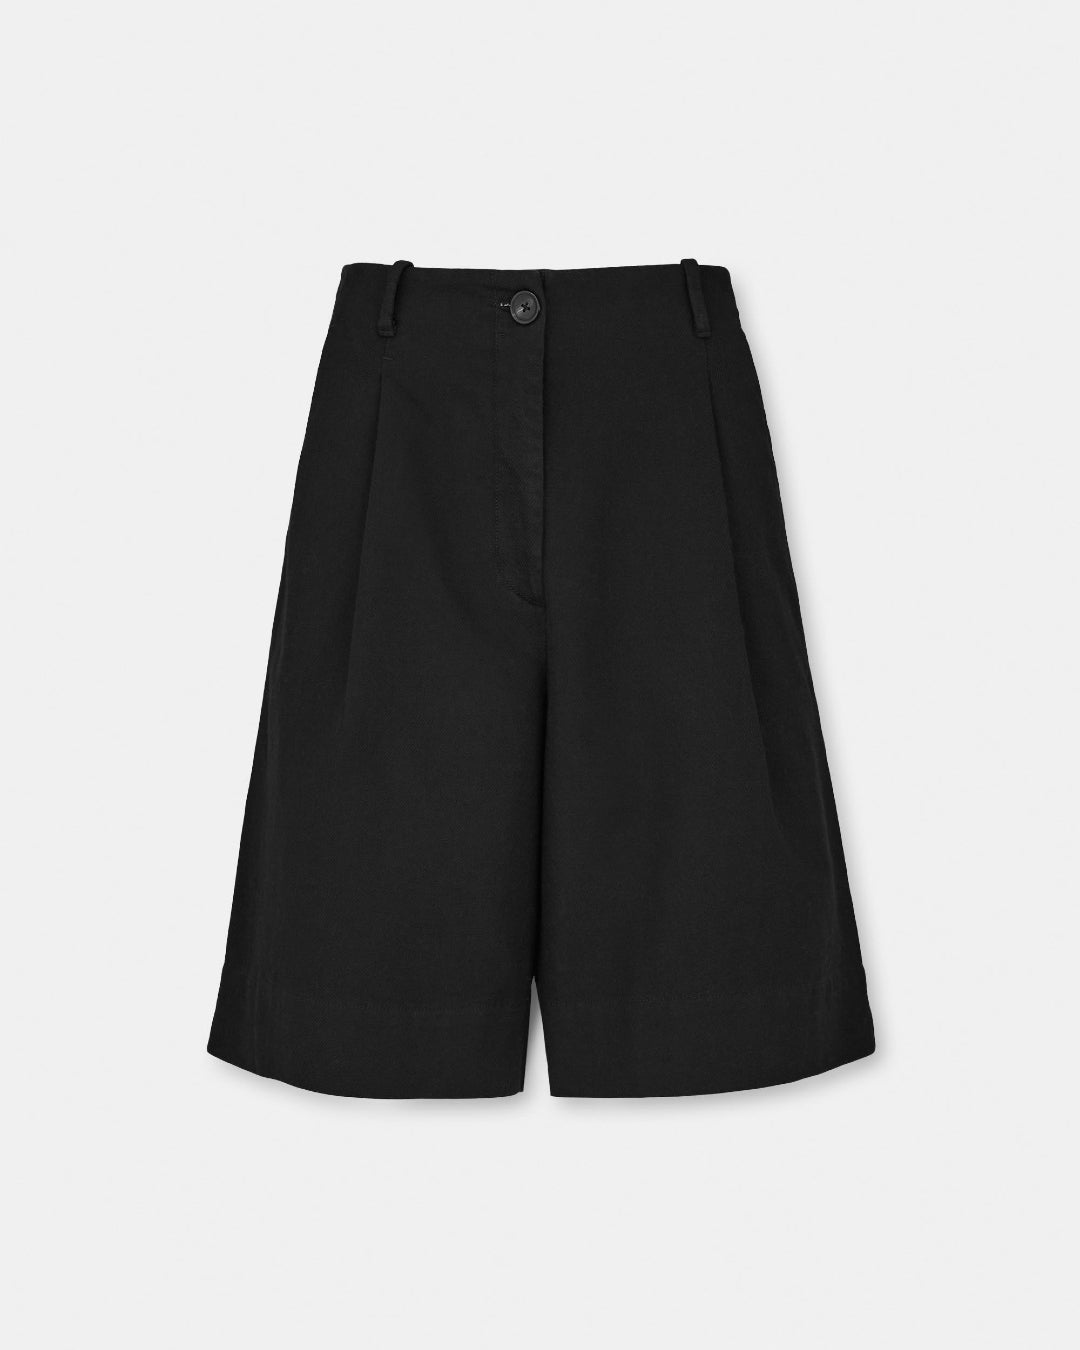 Willy Shorts | Black